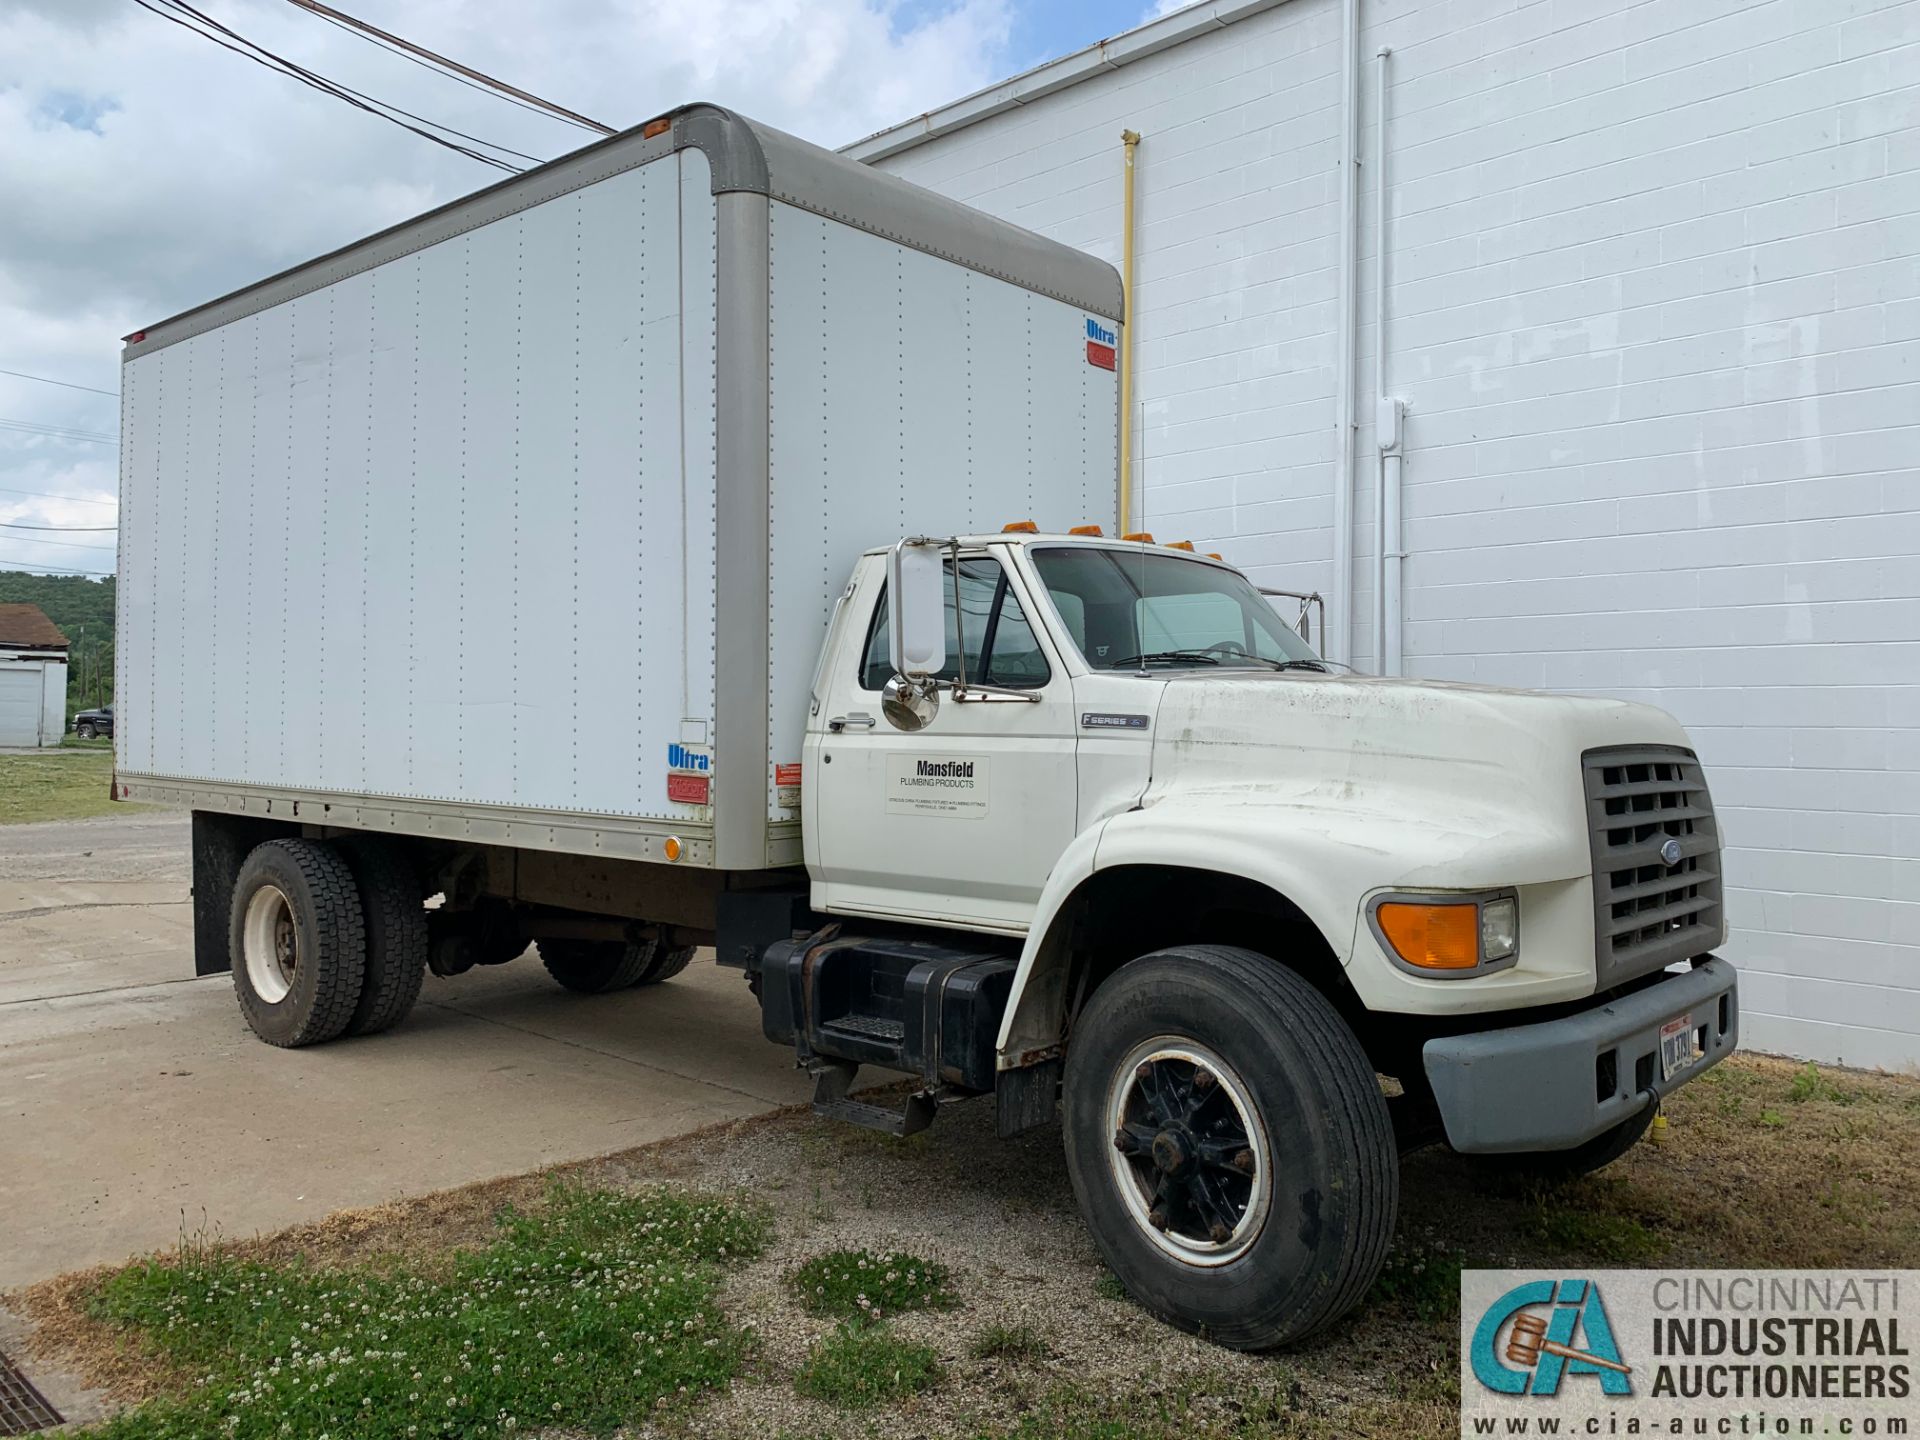 1995 FORD F-800 DUALLY BOX TRUCK; VIN # 1FXF80C55VA35110, 5-SPEED MANUAL TRANSMISSION, 141,632 - Image 2 of 15